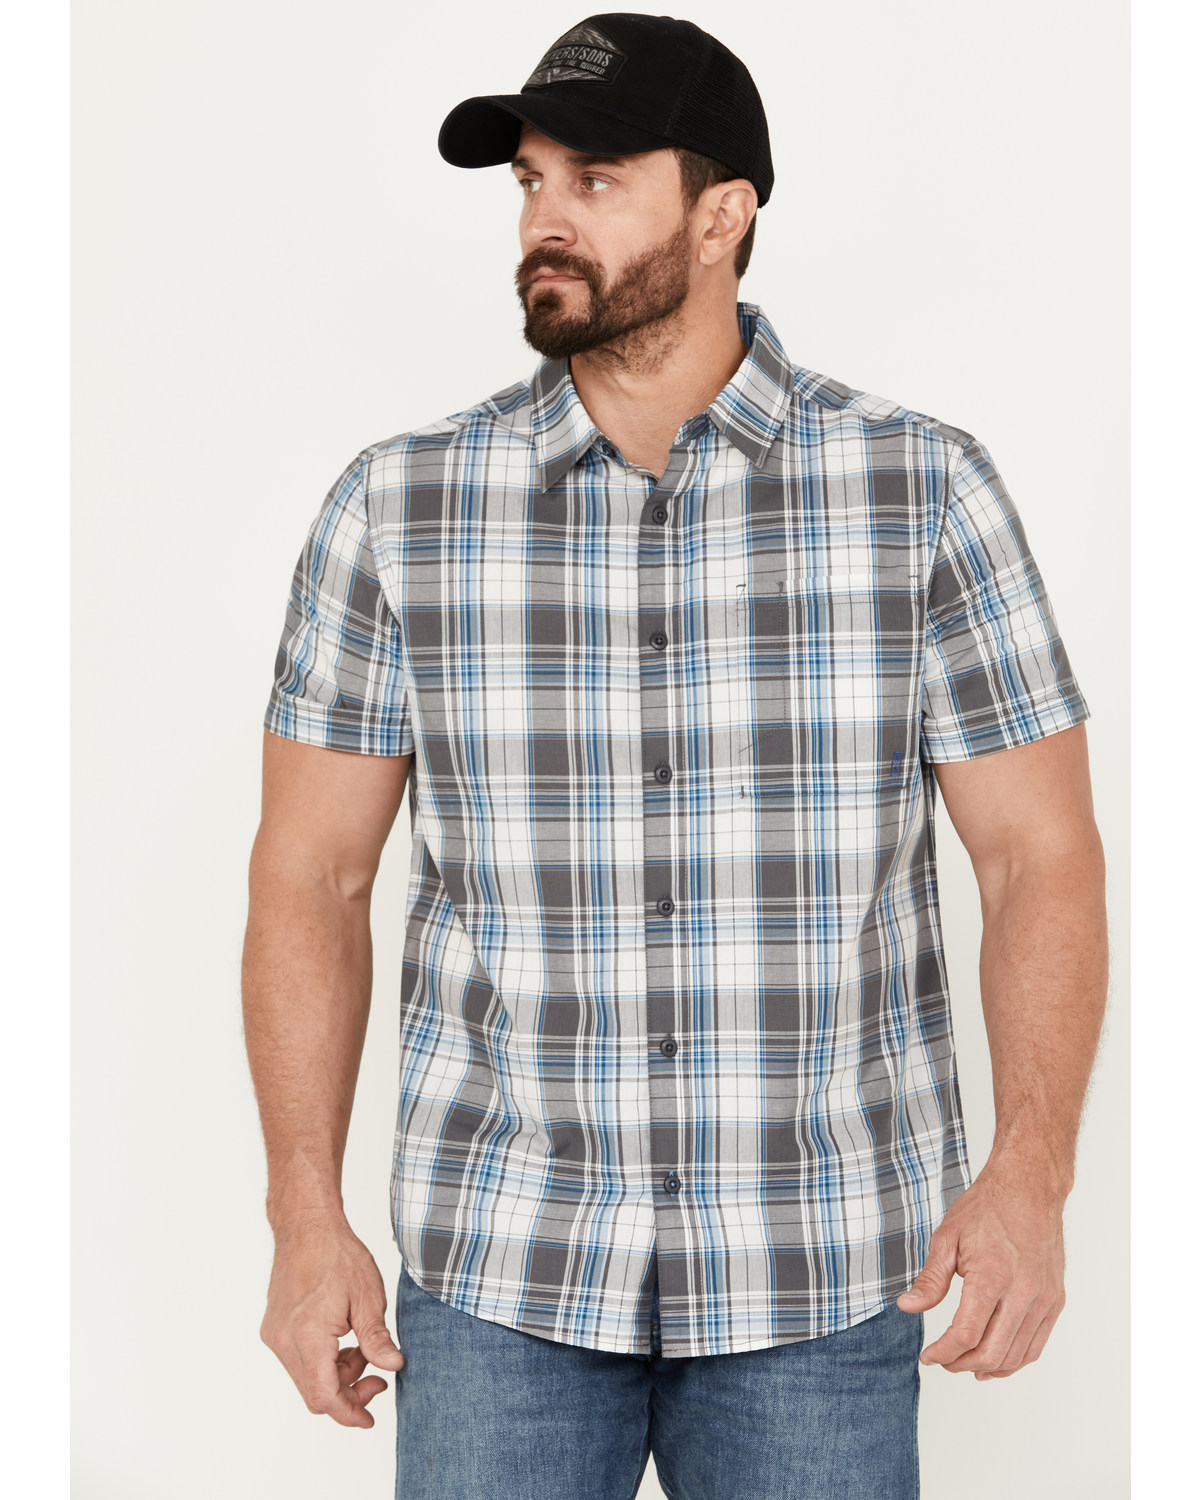 Brothers and Sons Men's Wagoner Plaid Print Short Sleeve Button-Down Western Shirt